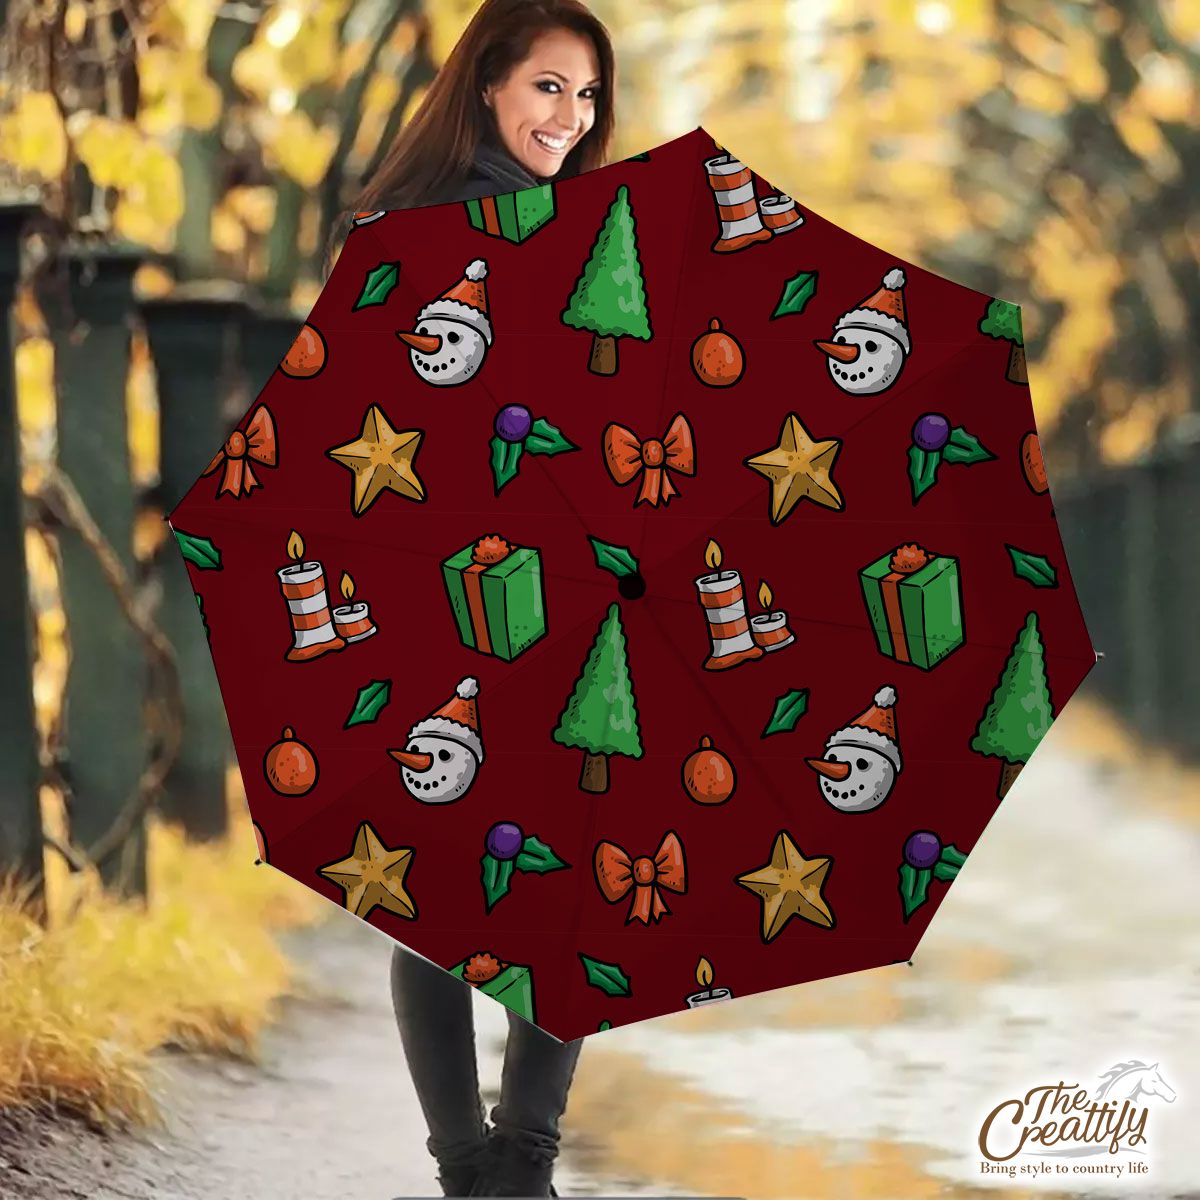 Christmas Gifts, Candles, Pine Tree And Snowman FaceWith Santa Hat Red Pattern Umbrella